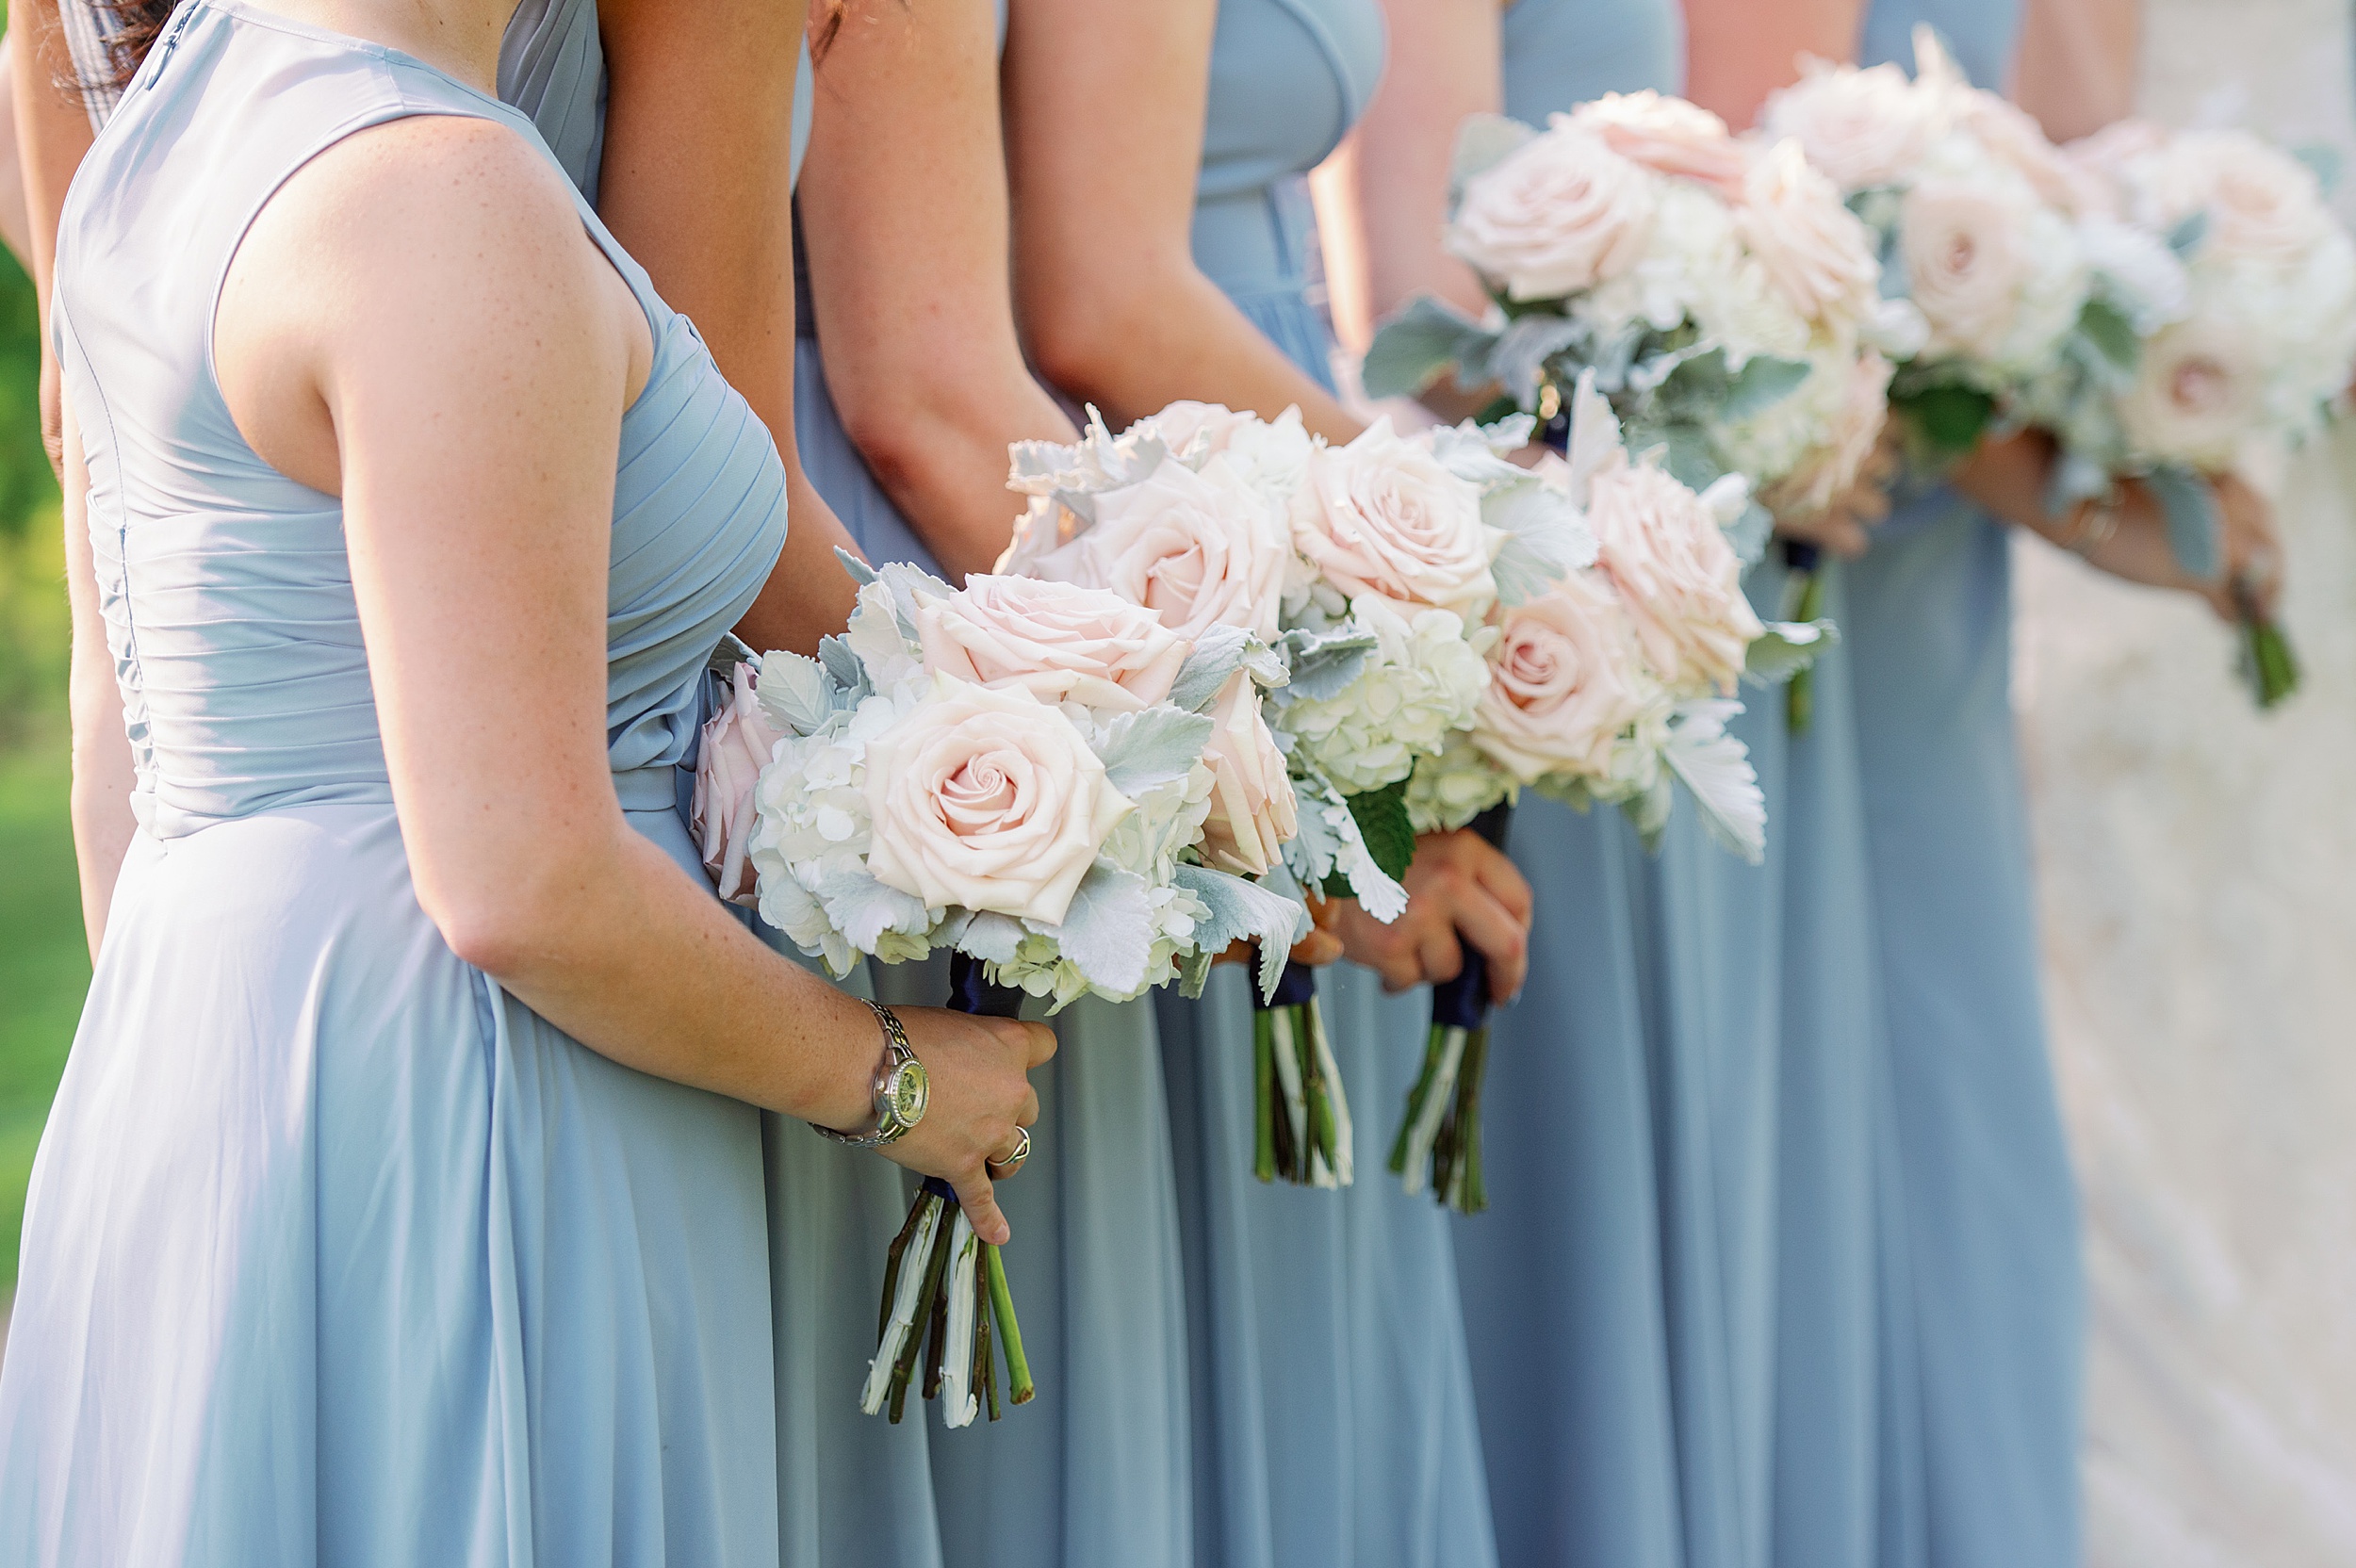 detail shot of blush and white flowers with pale blue bridesmaids dresses